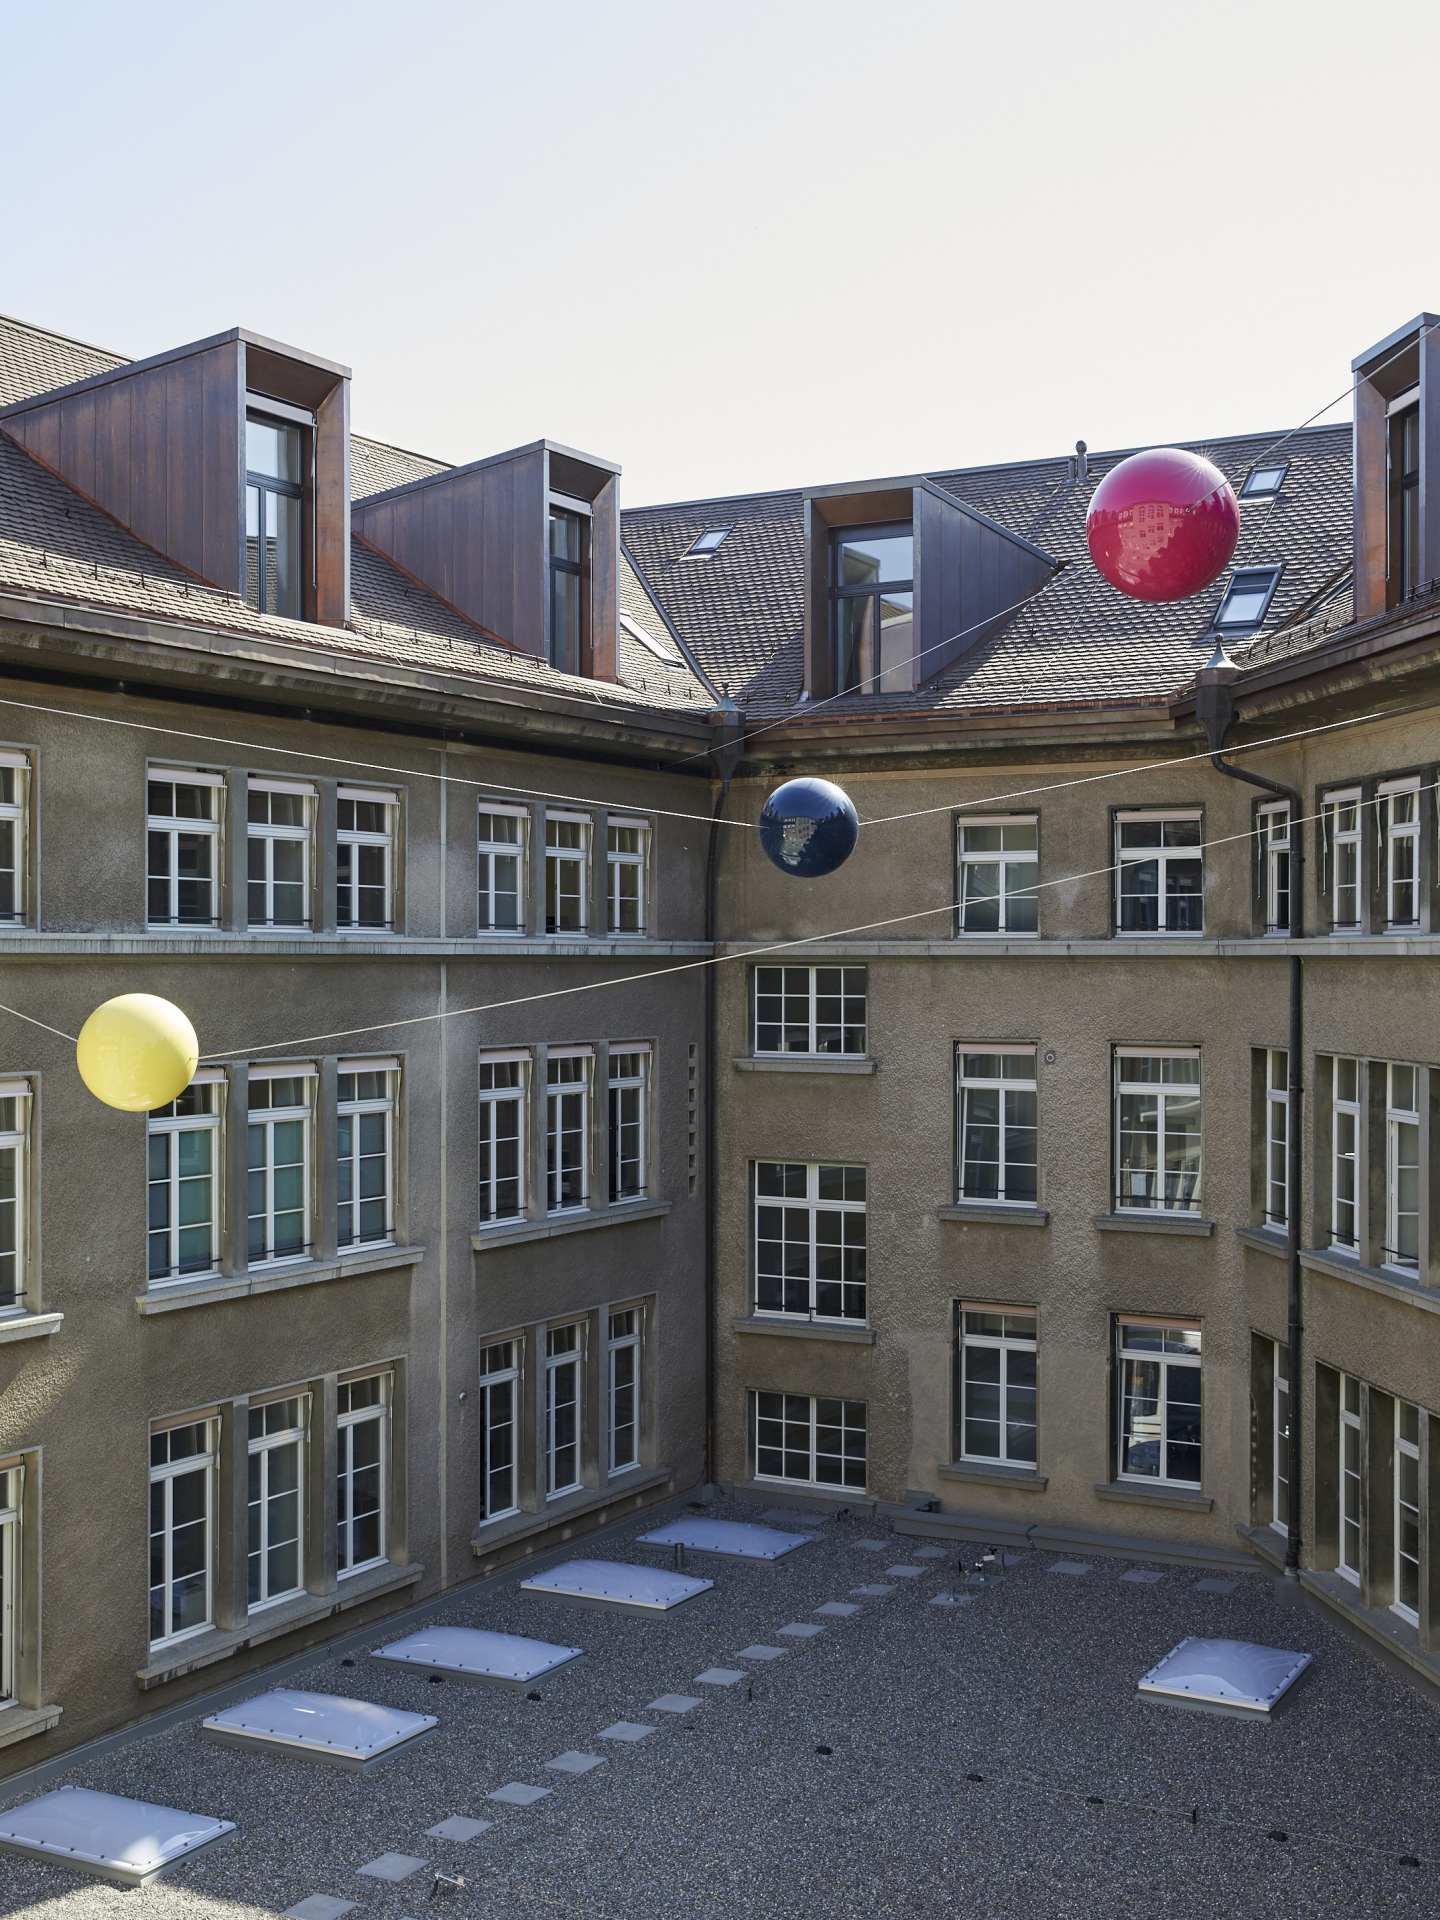 View of the courtyard with yellow, blue and red plastic balls on steel cables